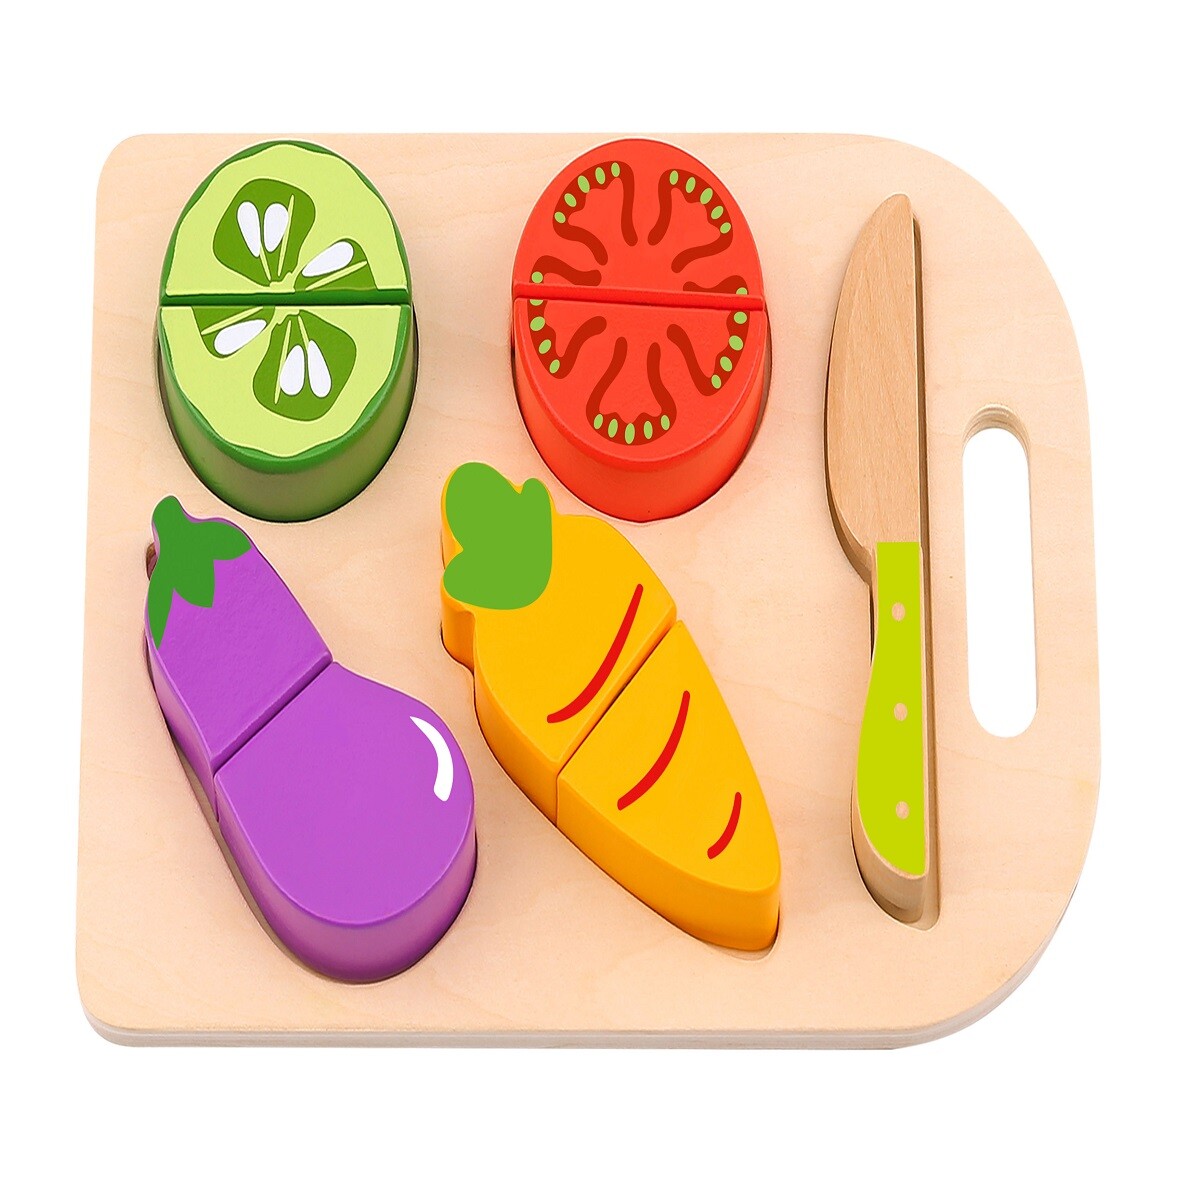 tooky toy cutting vegetables 10 pzs 